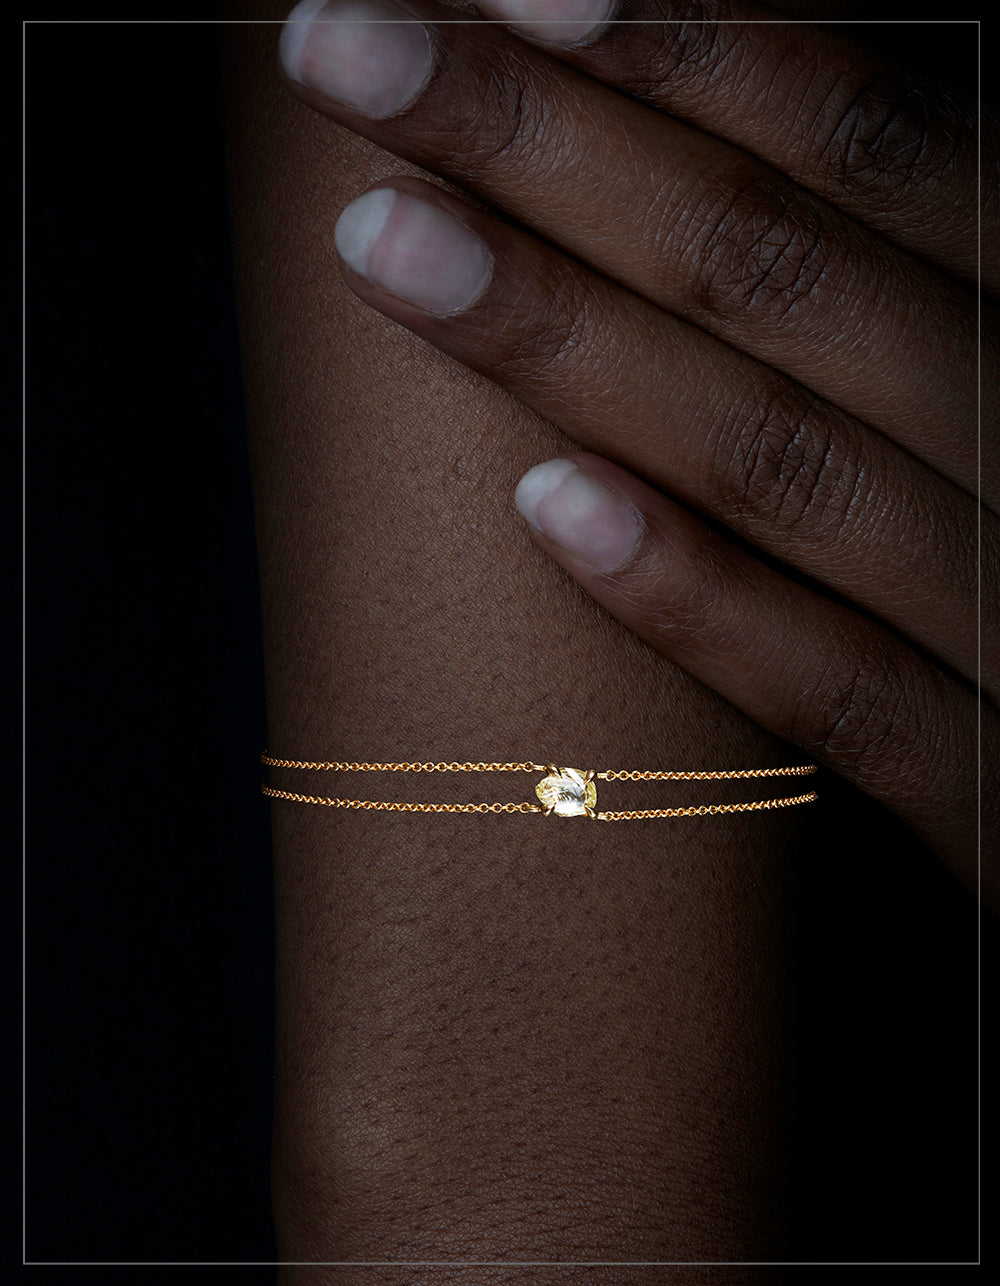 Simplicity in Gold Chain Bracelet – 0.47 ct.